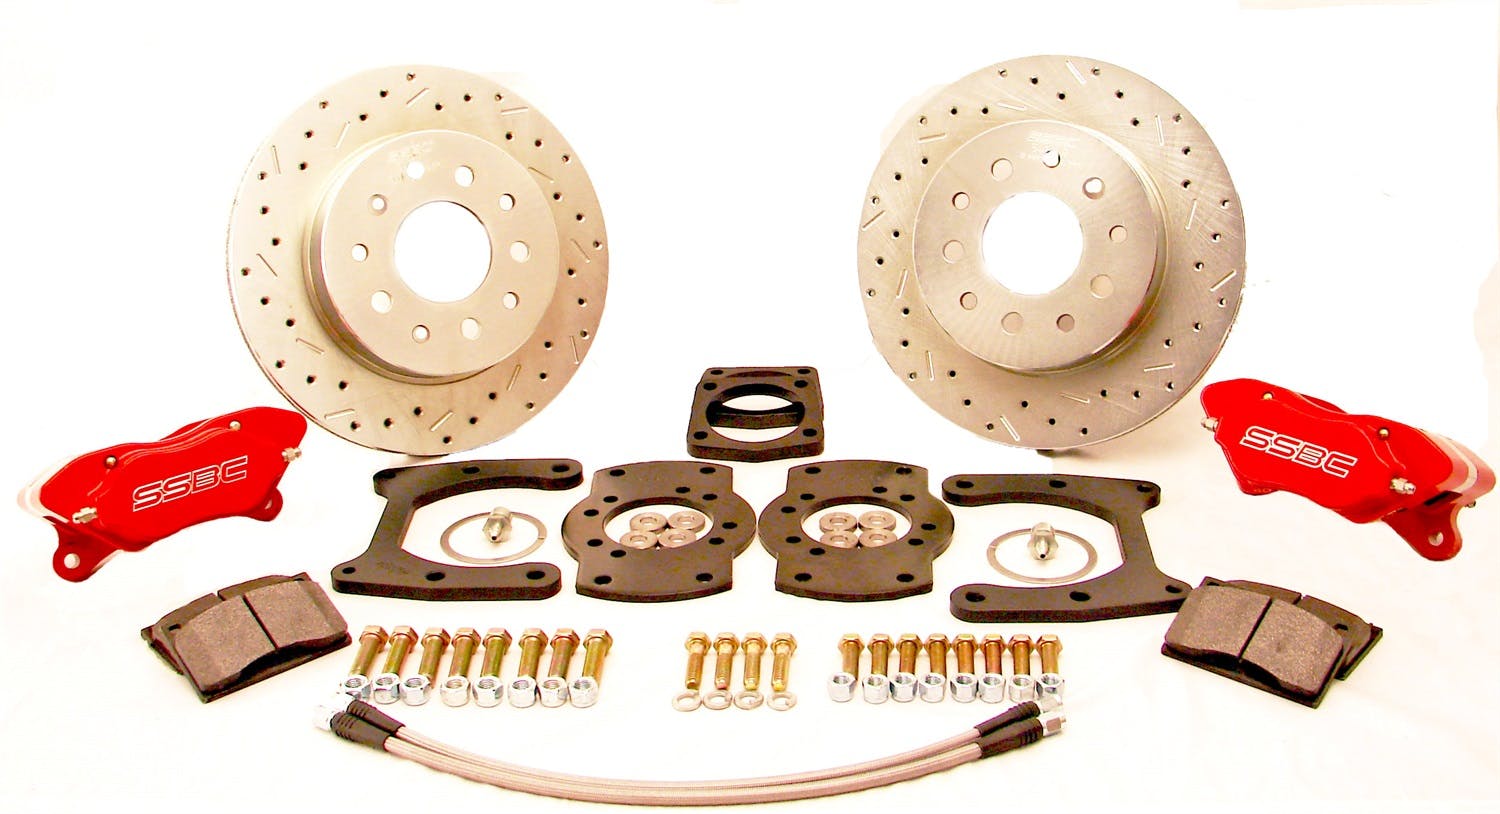 Stainless Steel Brakes W112-26BK At The Wheels Comp S W112-26 w/black powder coat